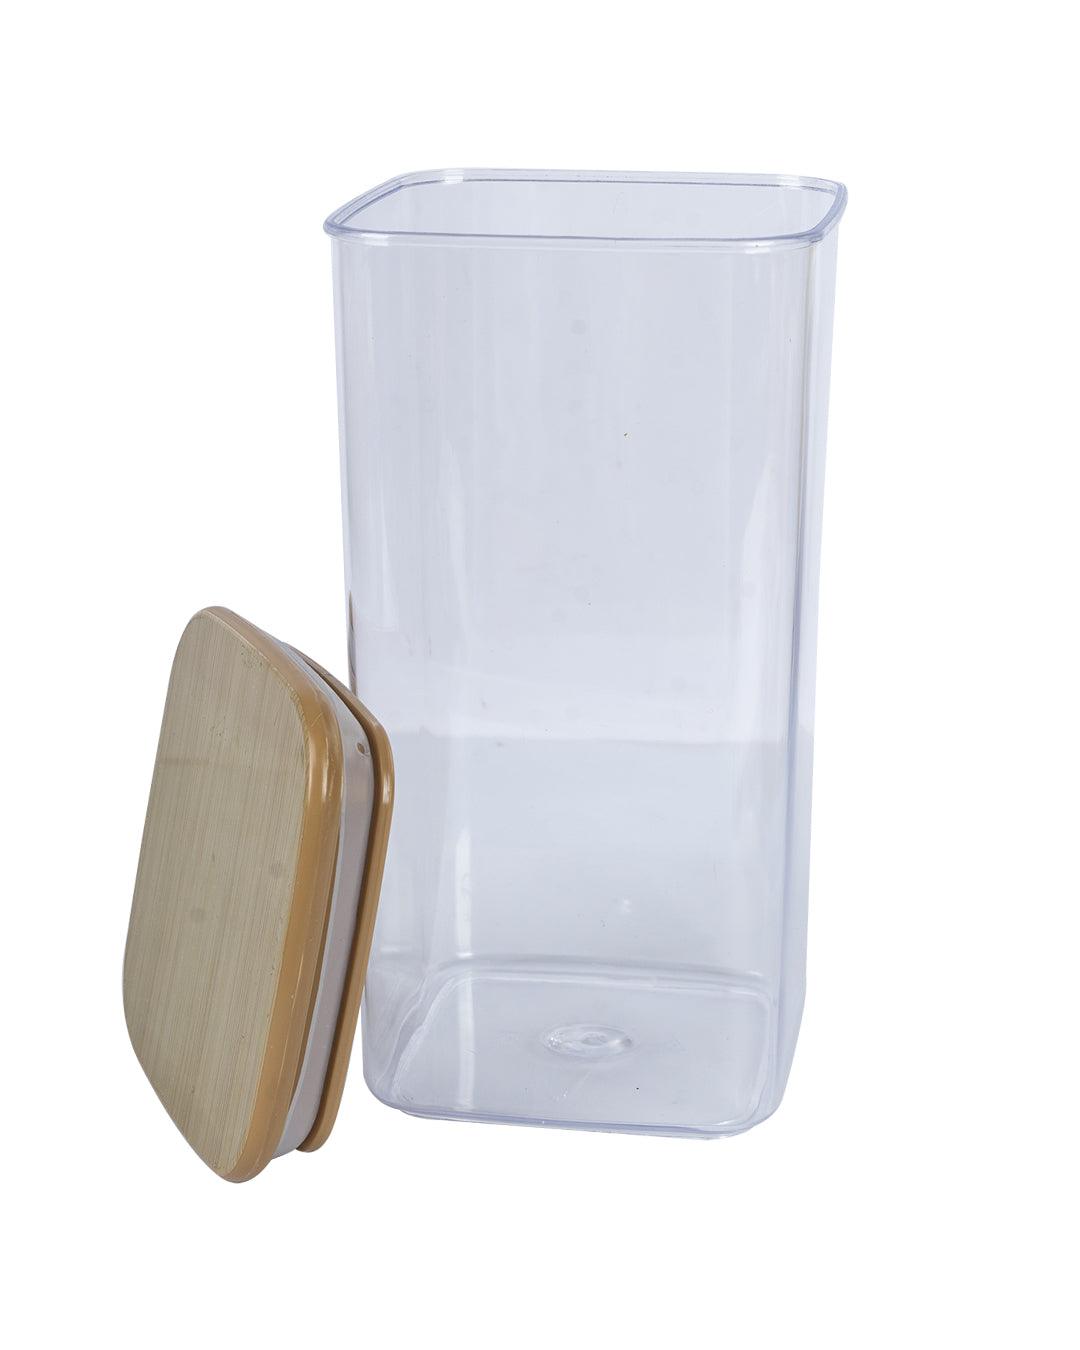 Sealed Container, Brown, Plastic Lid, 1.3 Litre - MARKET 99